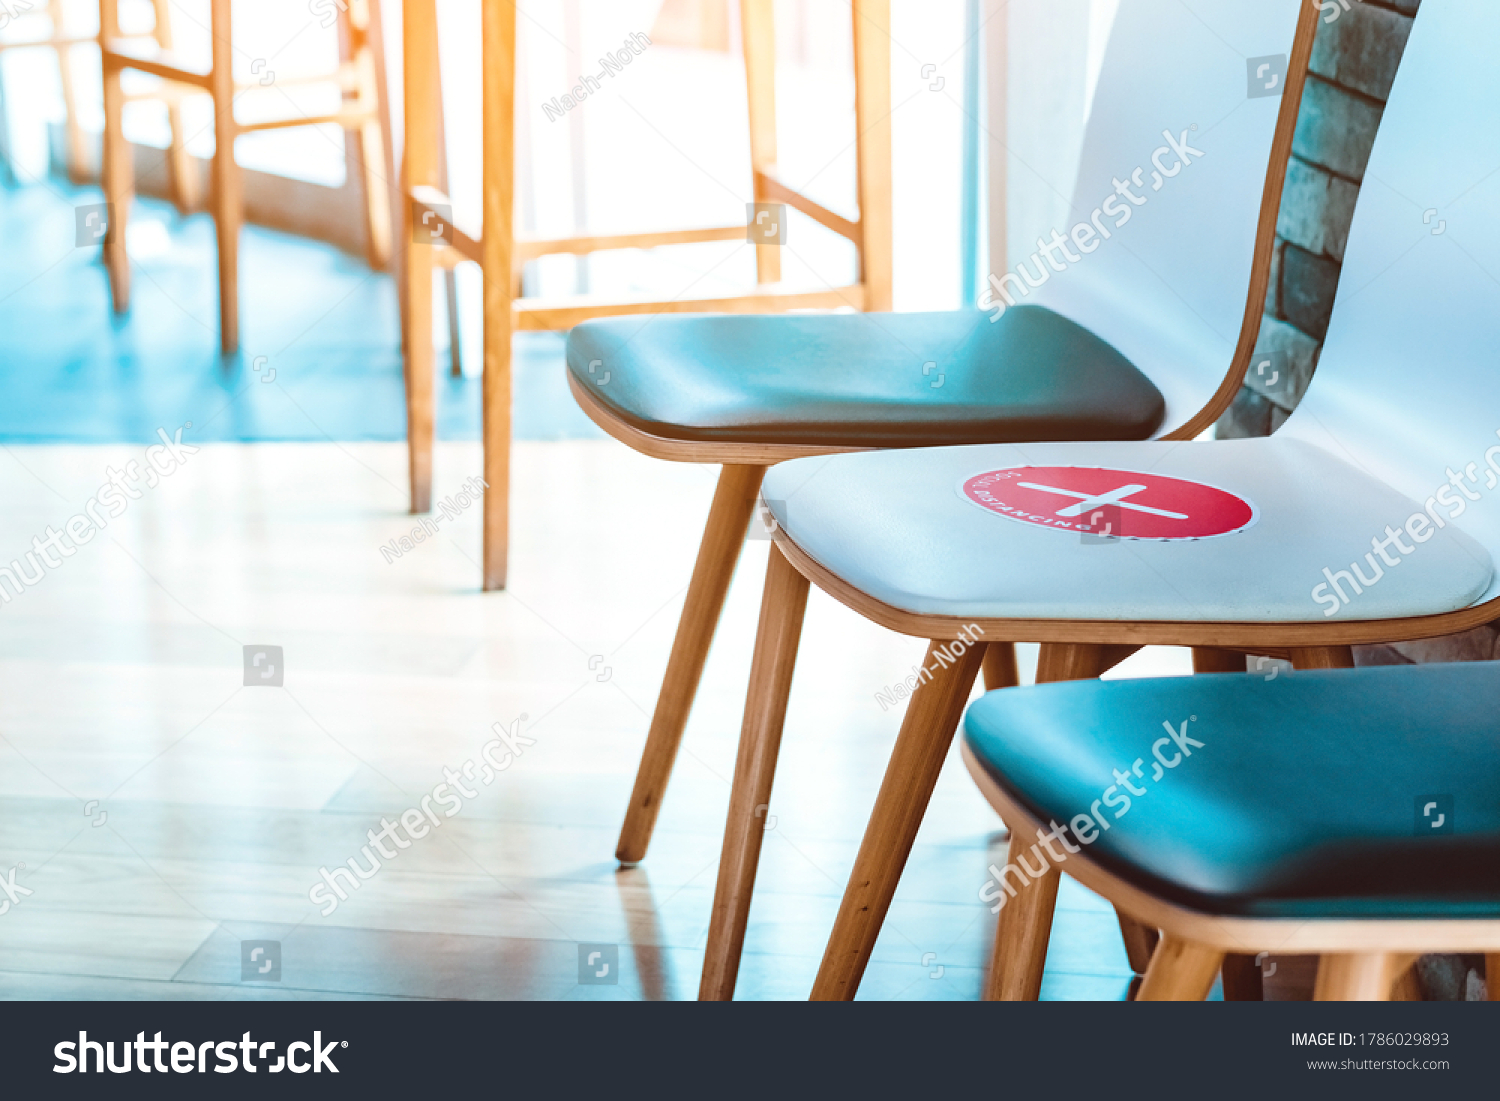 Alternative seating mark for social distance rules in the cafe distance for one seat from other people to protect from Corona Virus(COVID-19), social distancing for infection risk.New normal lifestyle #1786029893